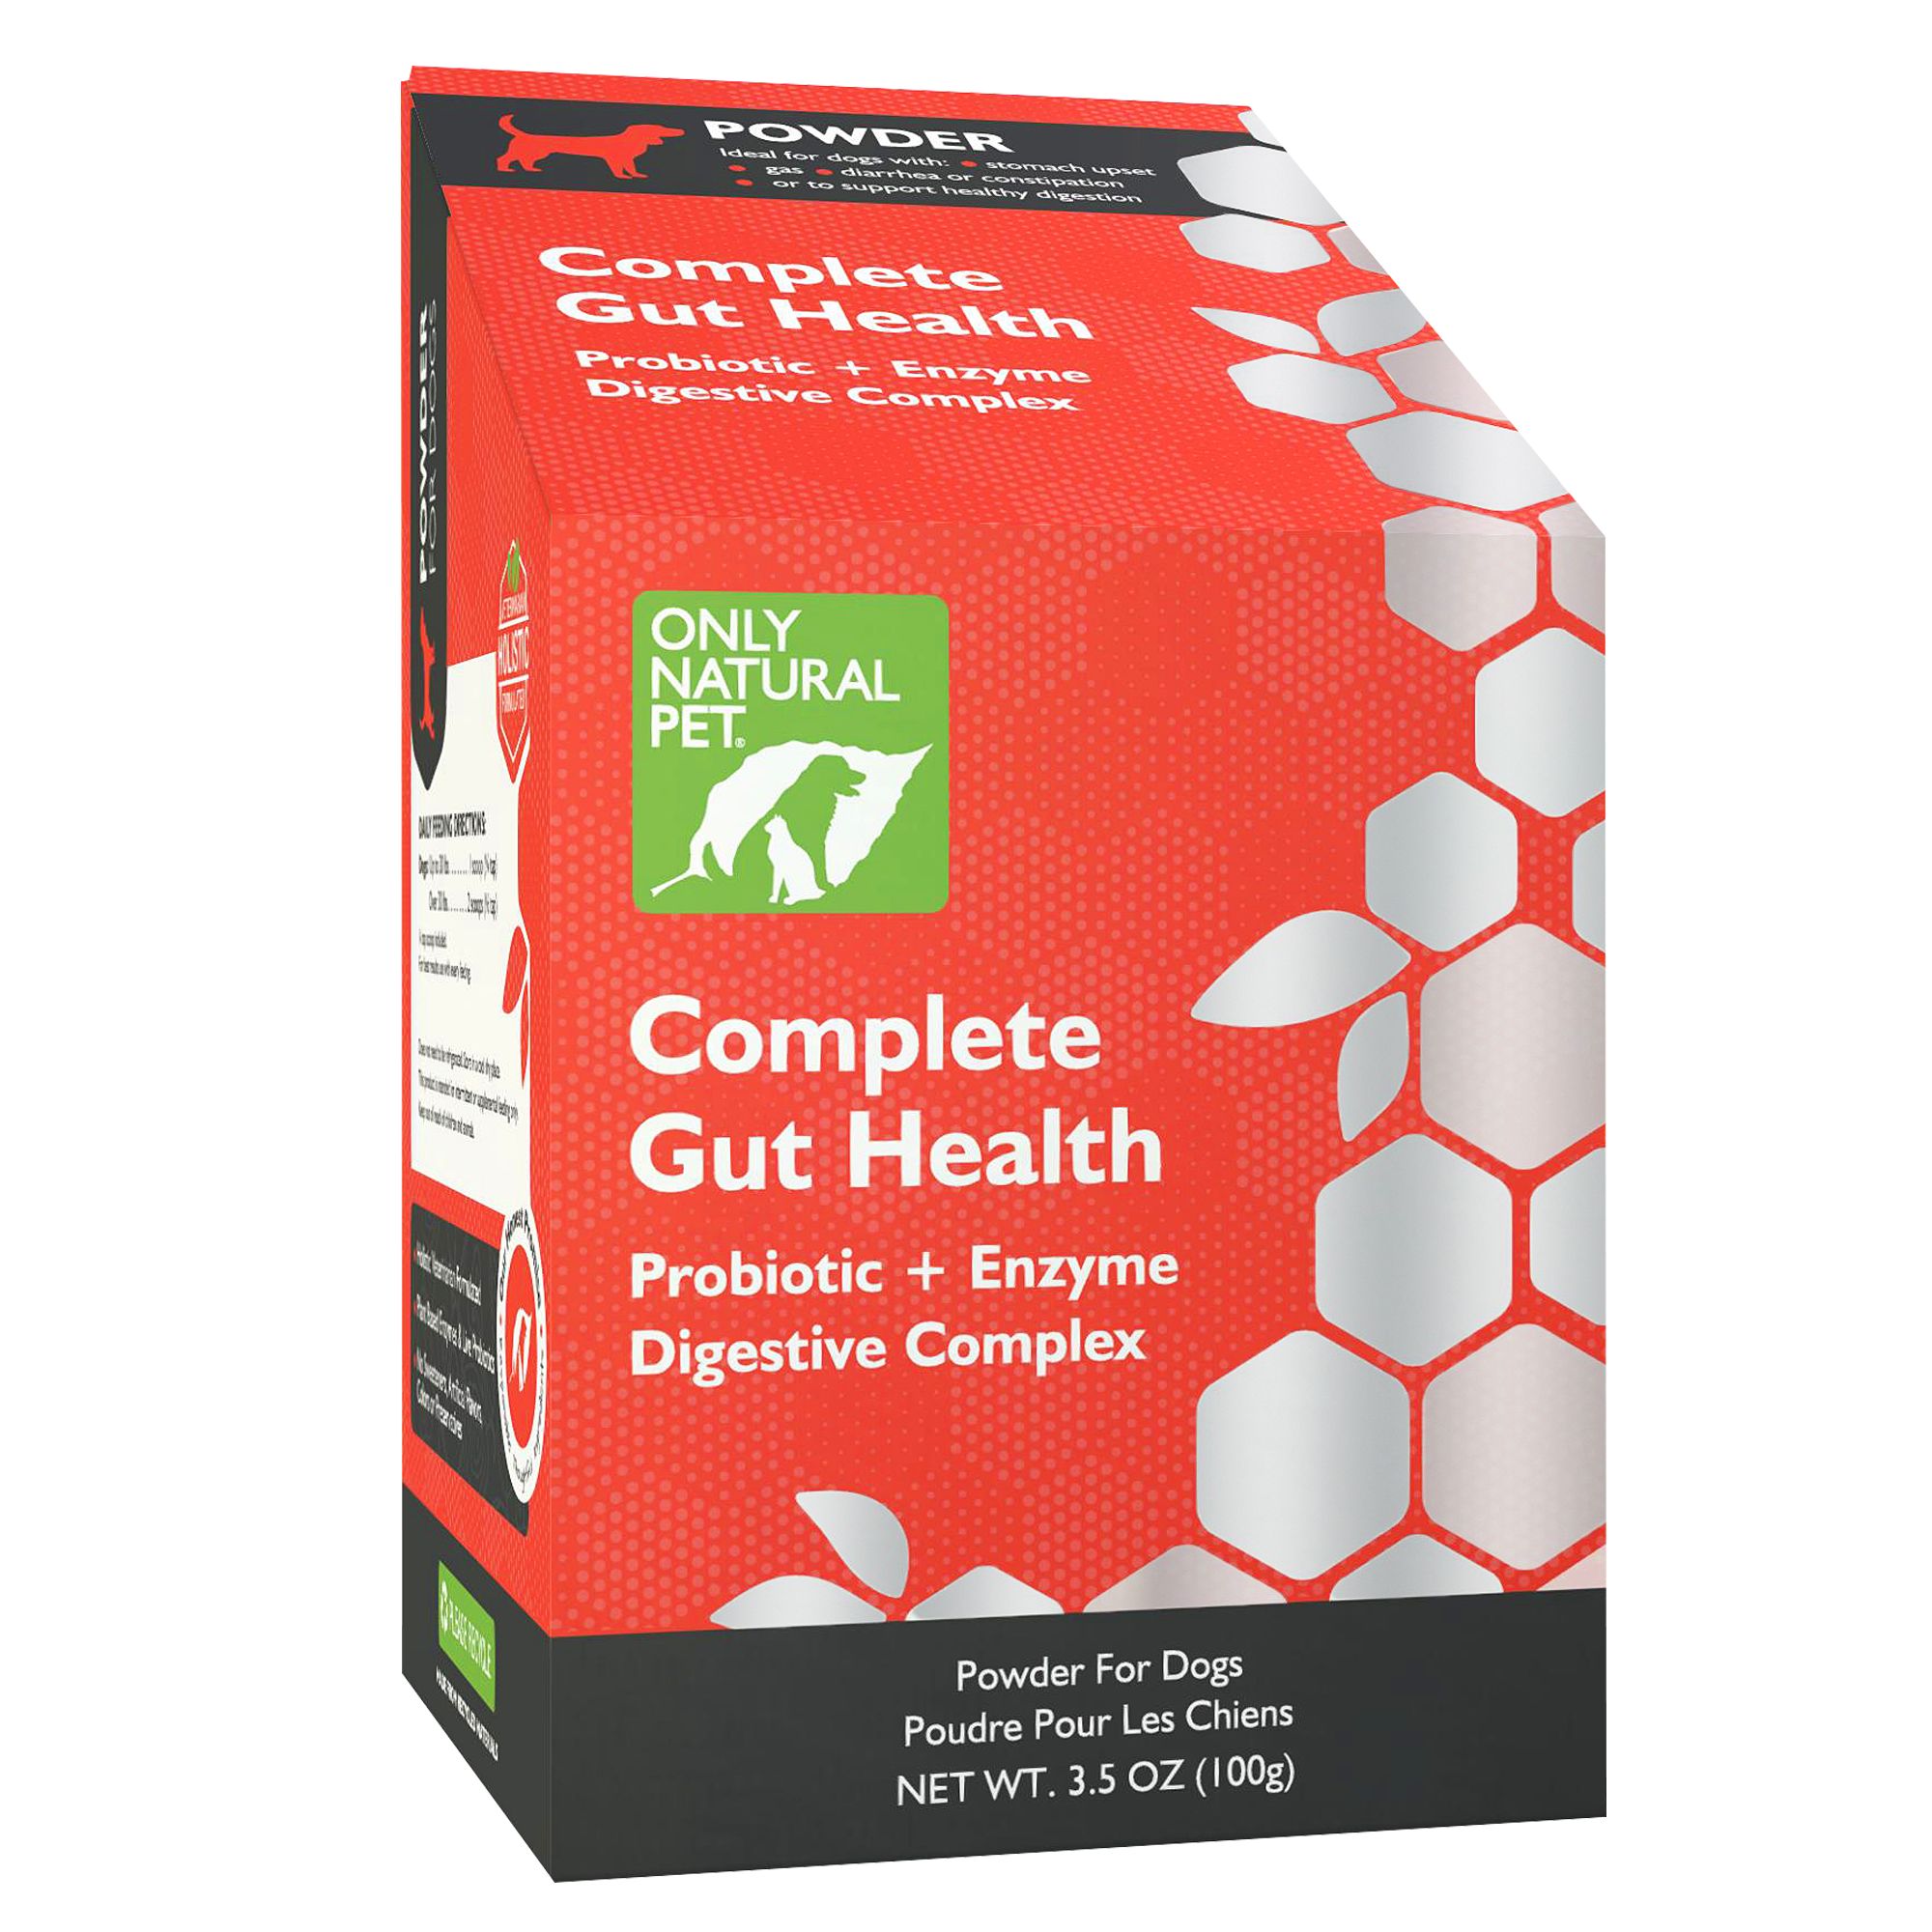 Only Natural Pet® Complete Gut Health Probiotic + Enzyme Digestive